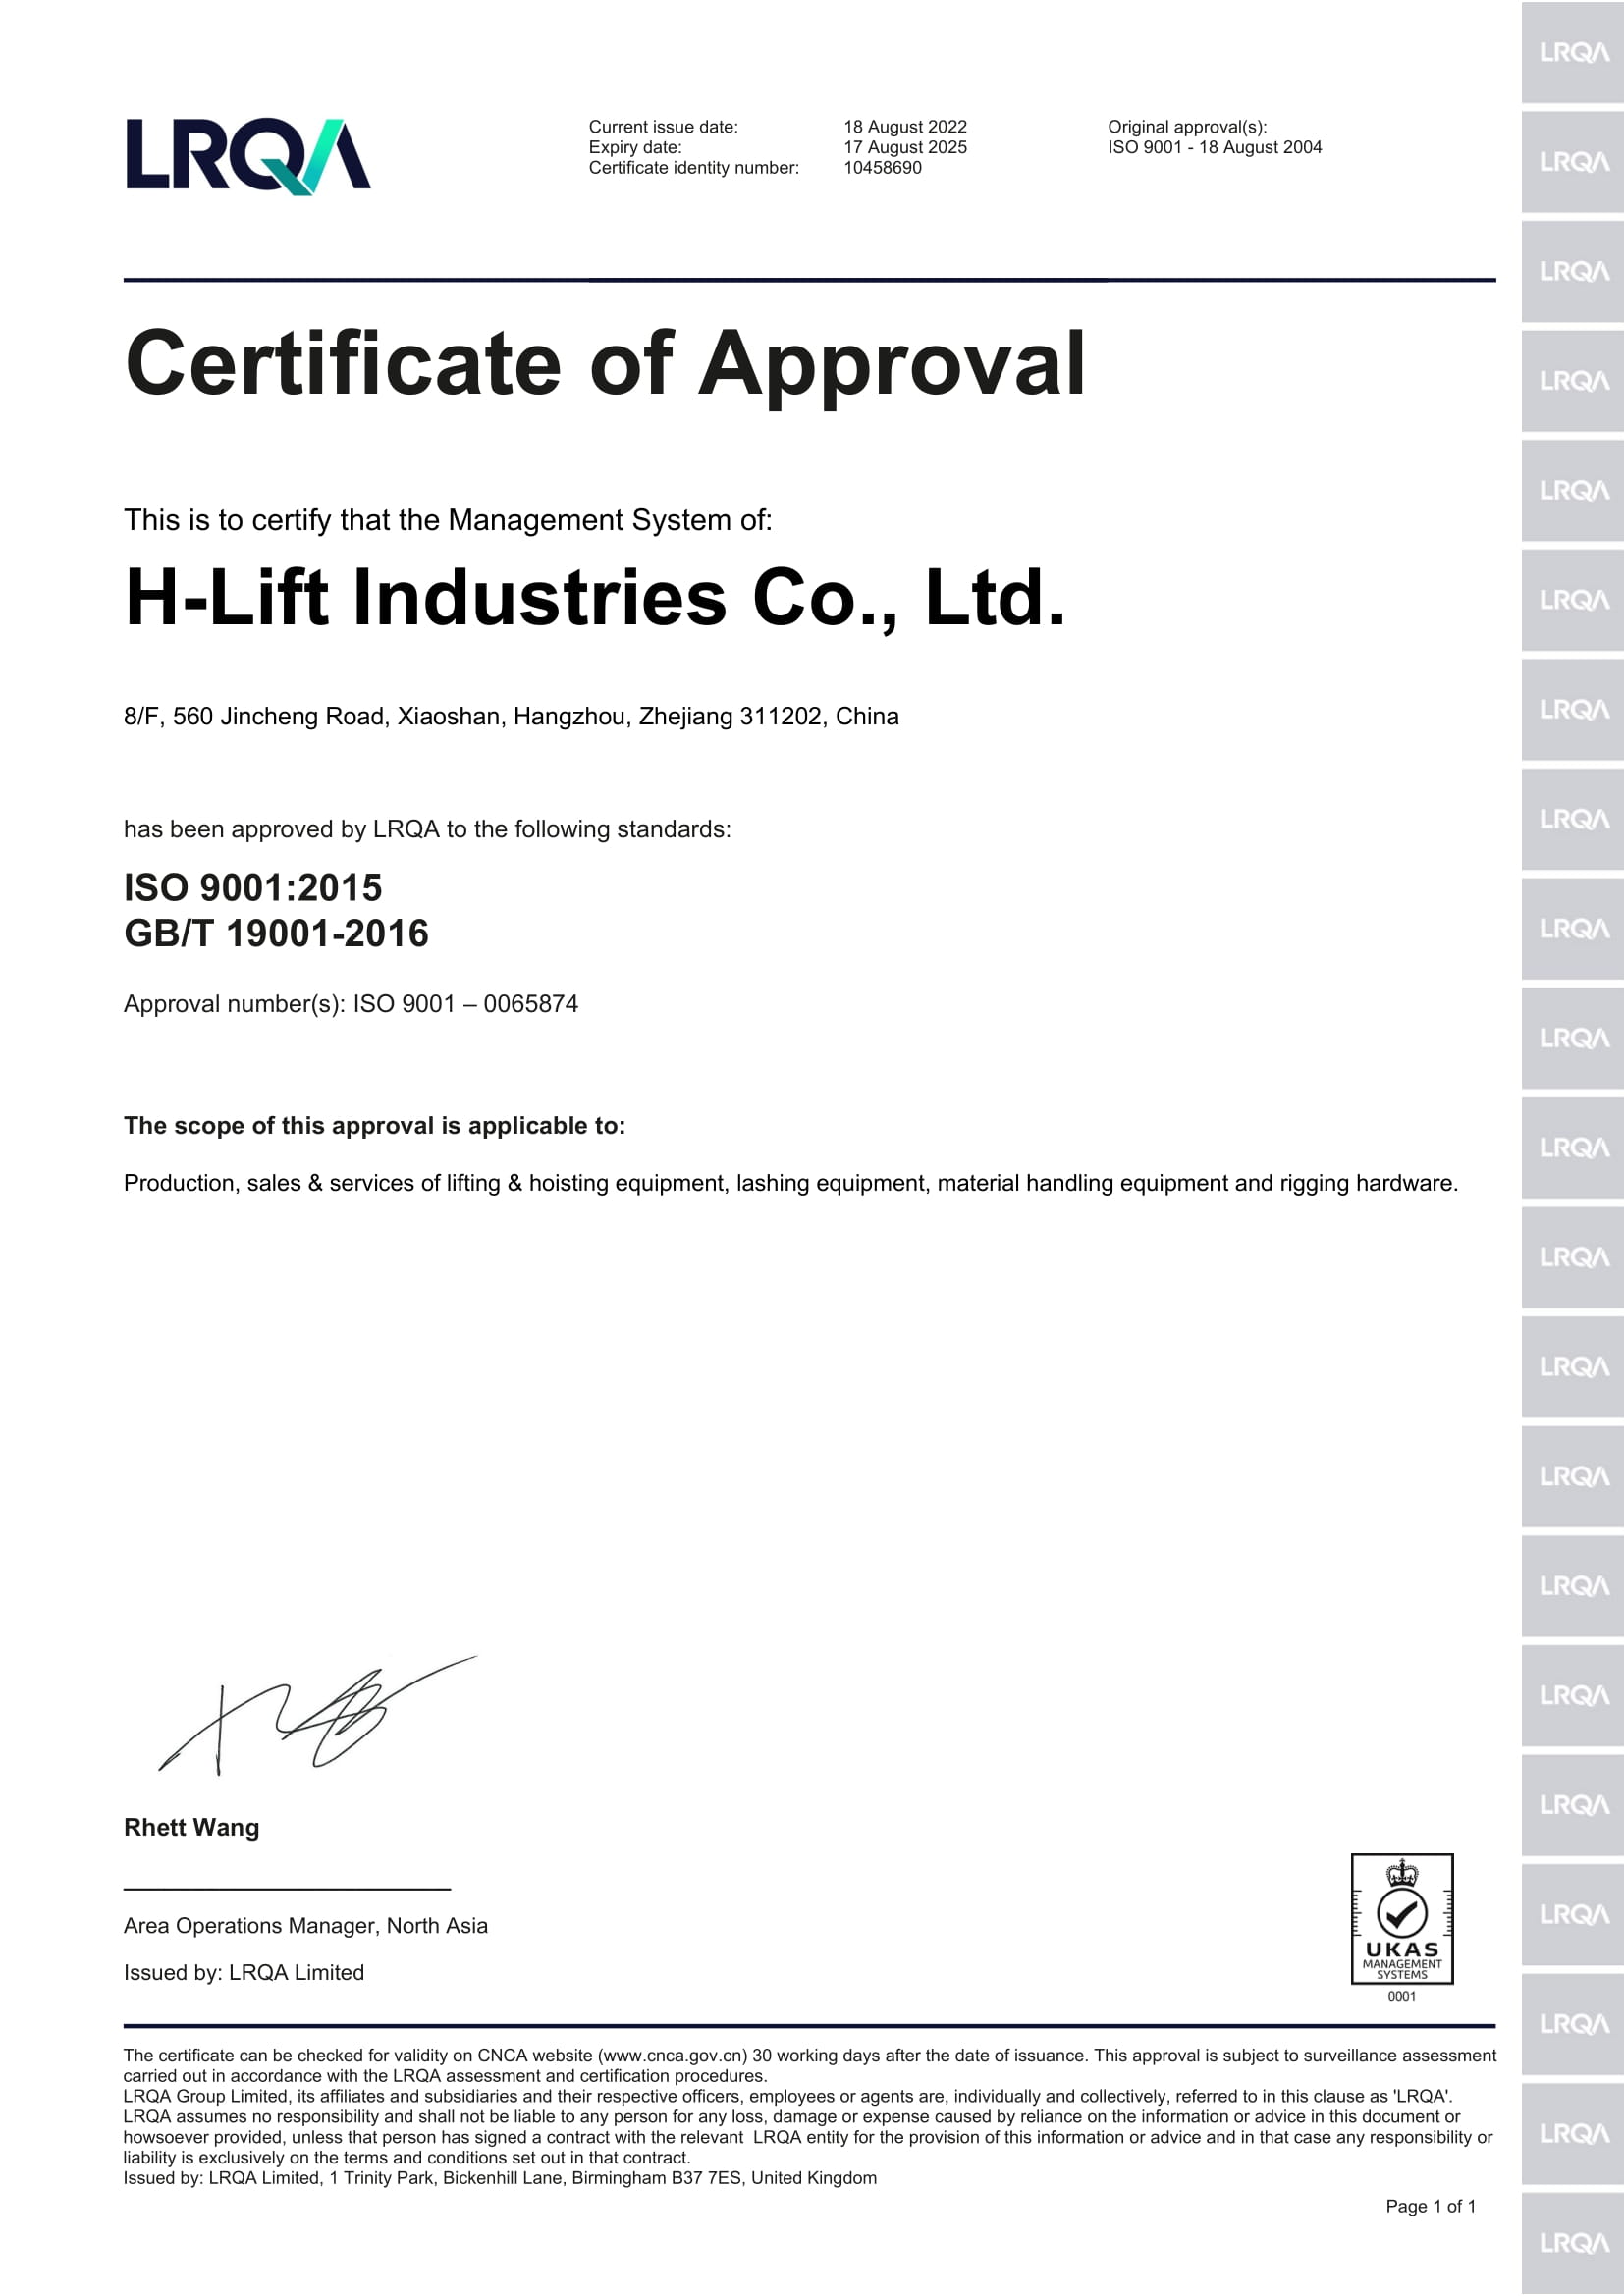 ISO 9001 Certificate of Approval